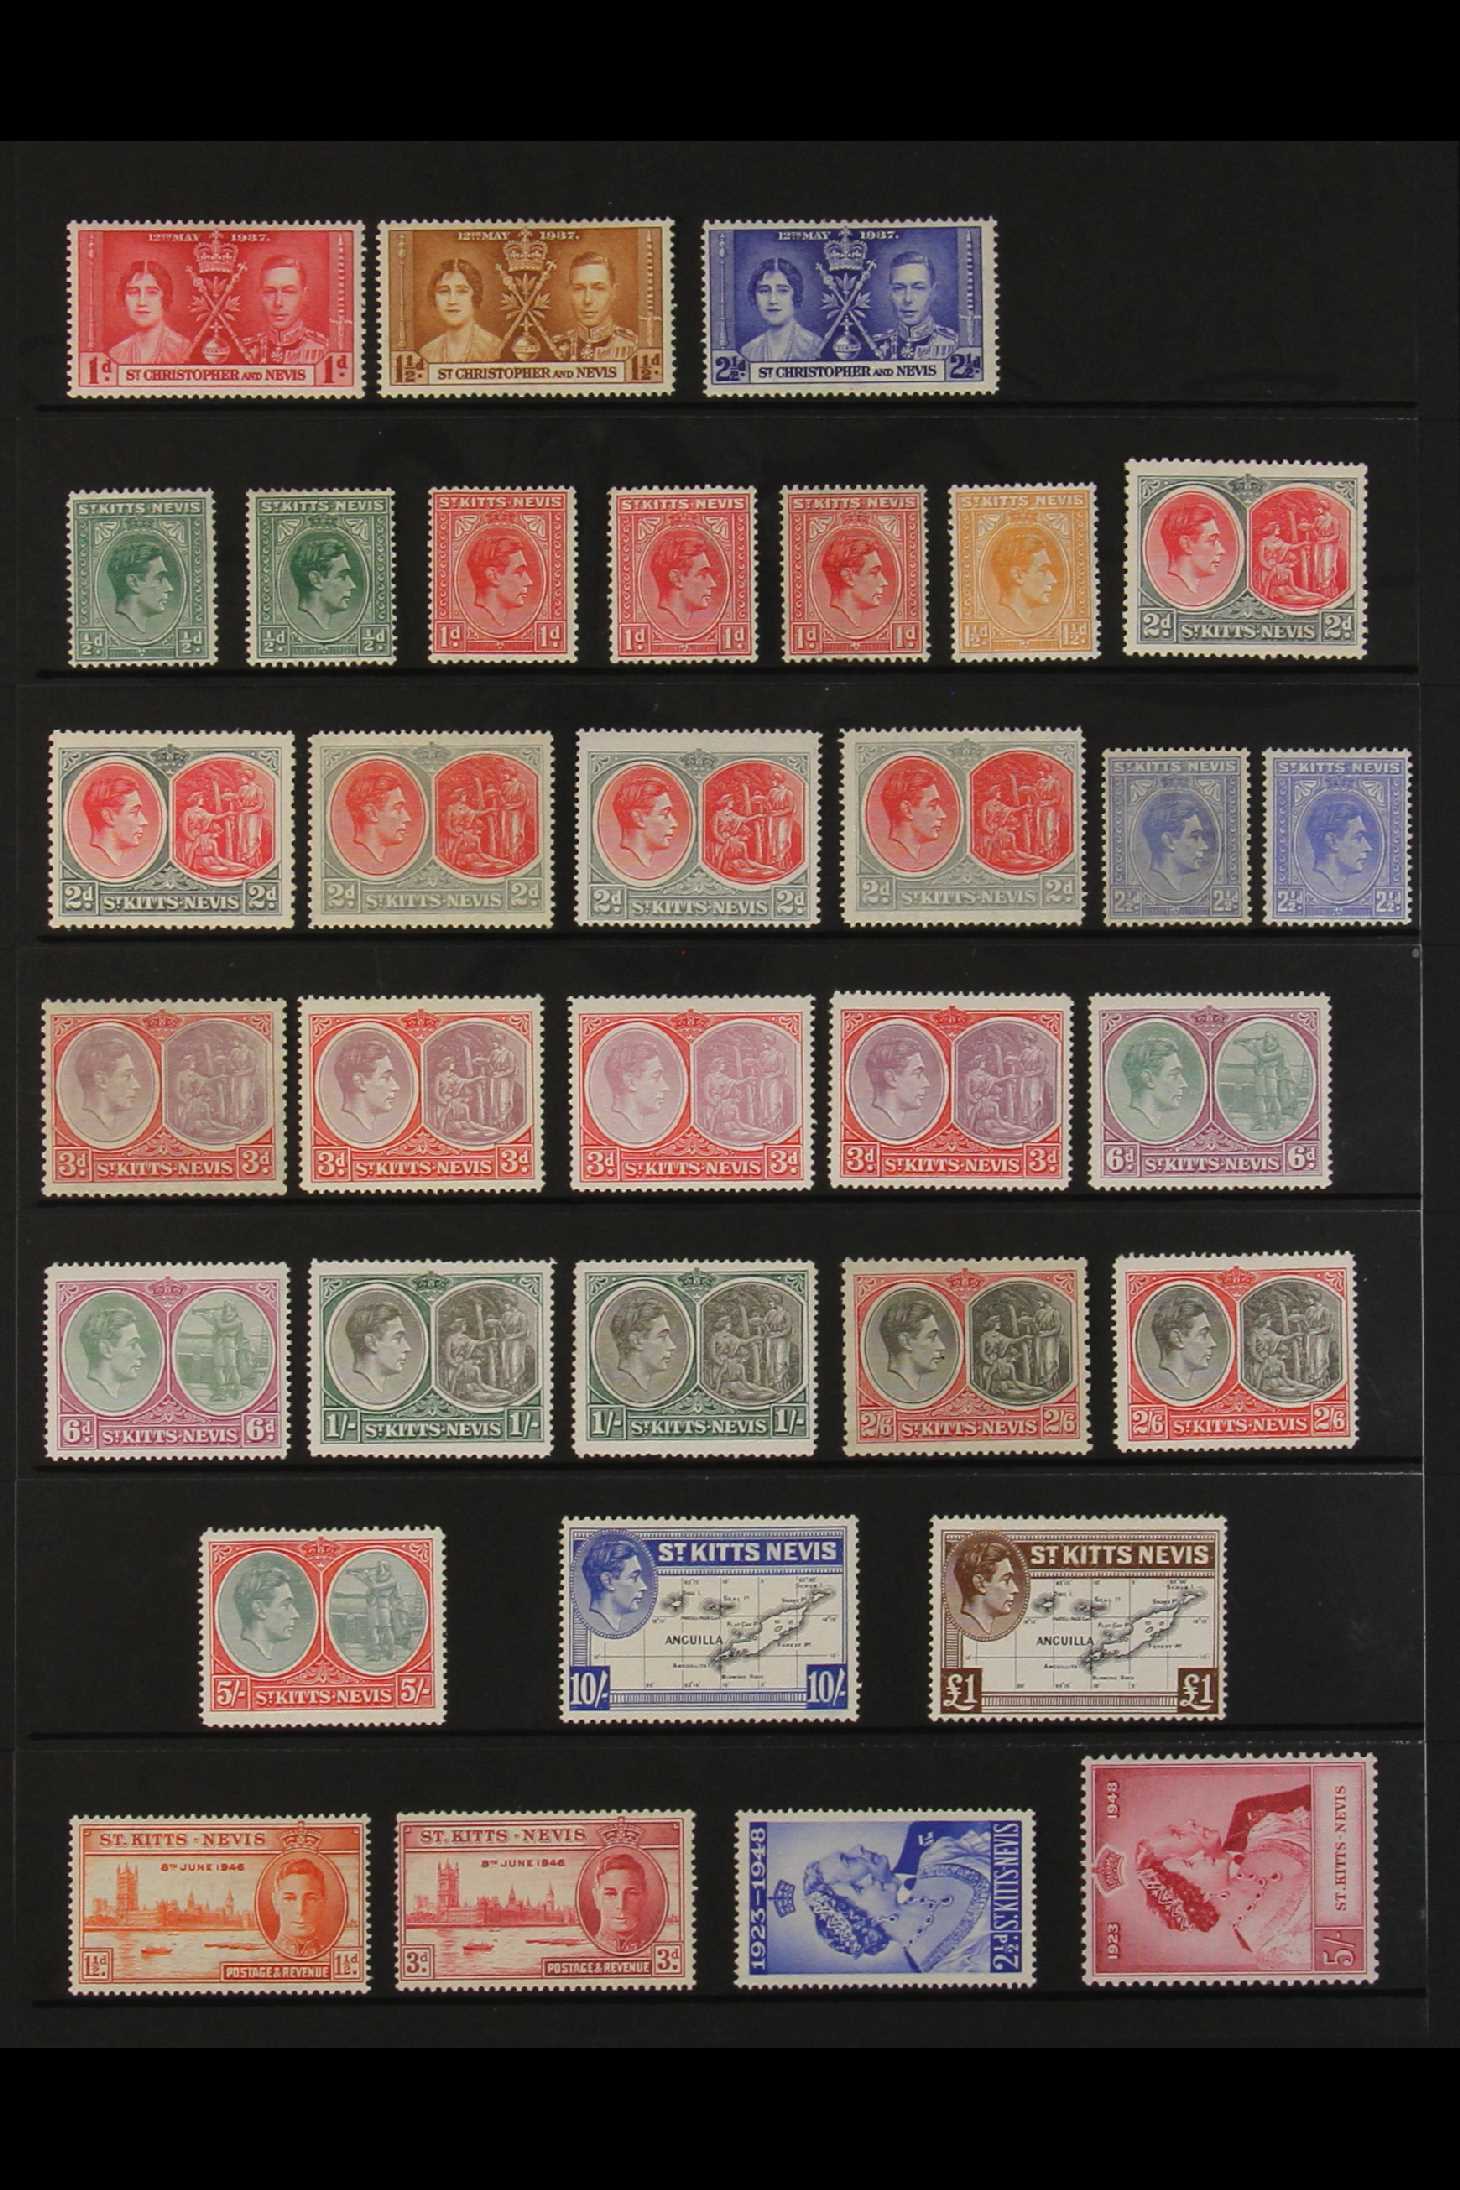 ST KITTS-NEVIS 1937 - 1952 KGVI MINT COLLECTION on Hagner pages with 1938-50 set plus many